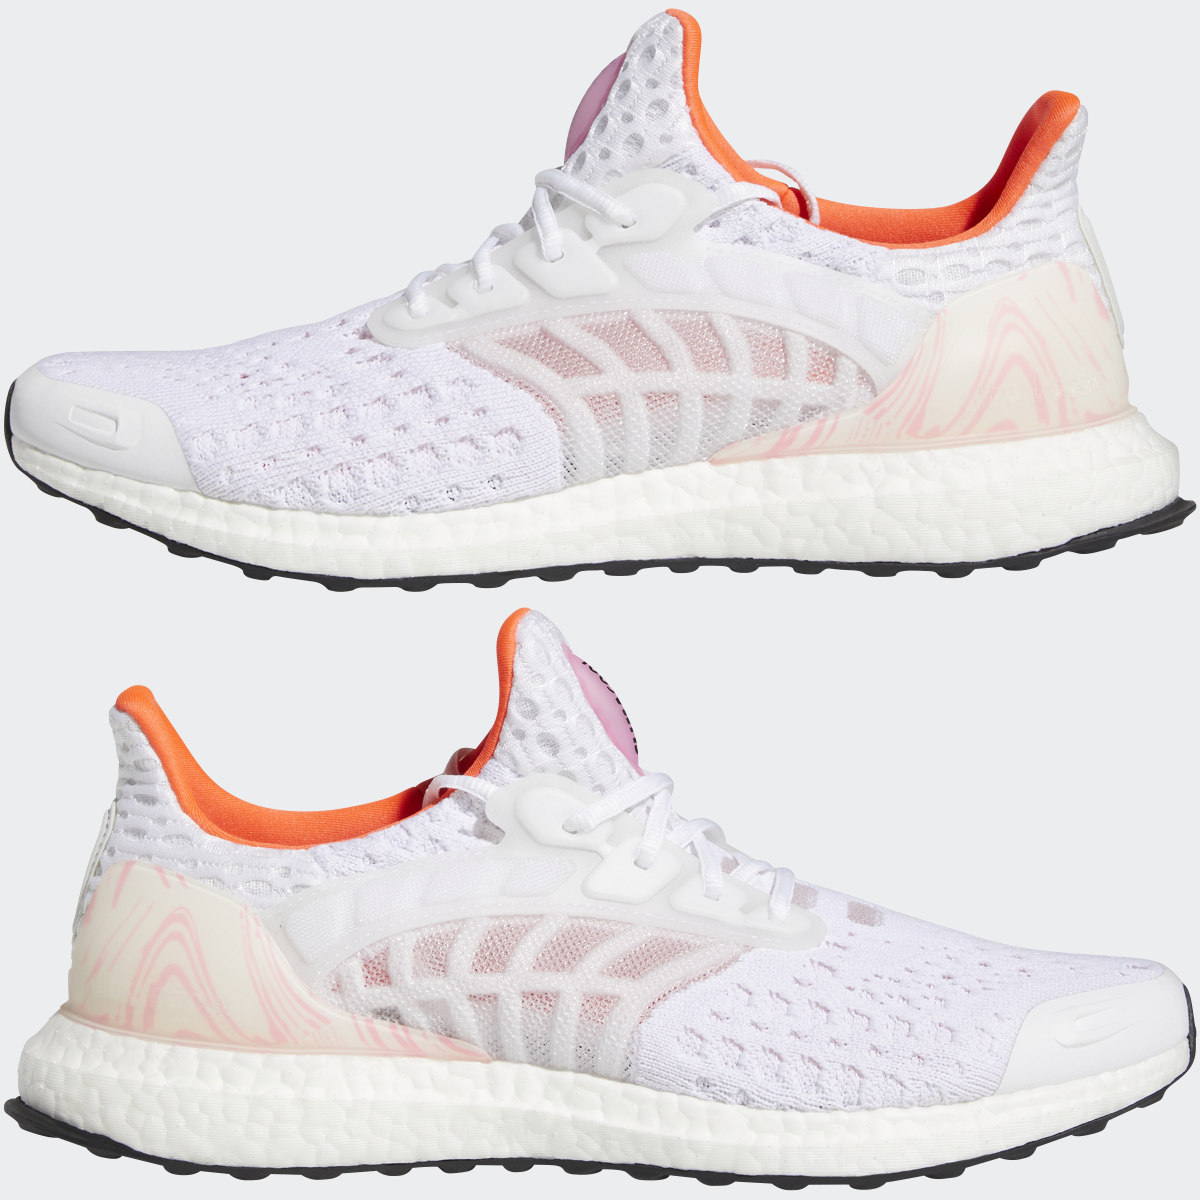 Adidas Chaussure Ultraboost CC_2 DNA Climacool Running Sportswear Lifestyle. 11